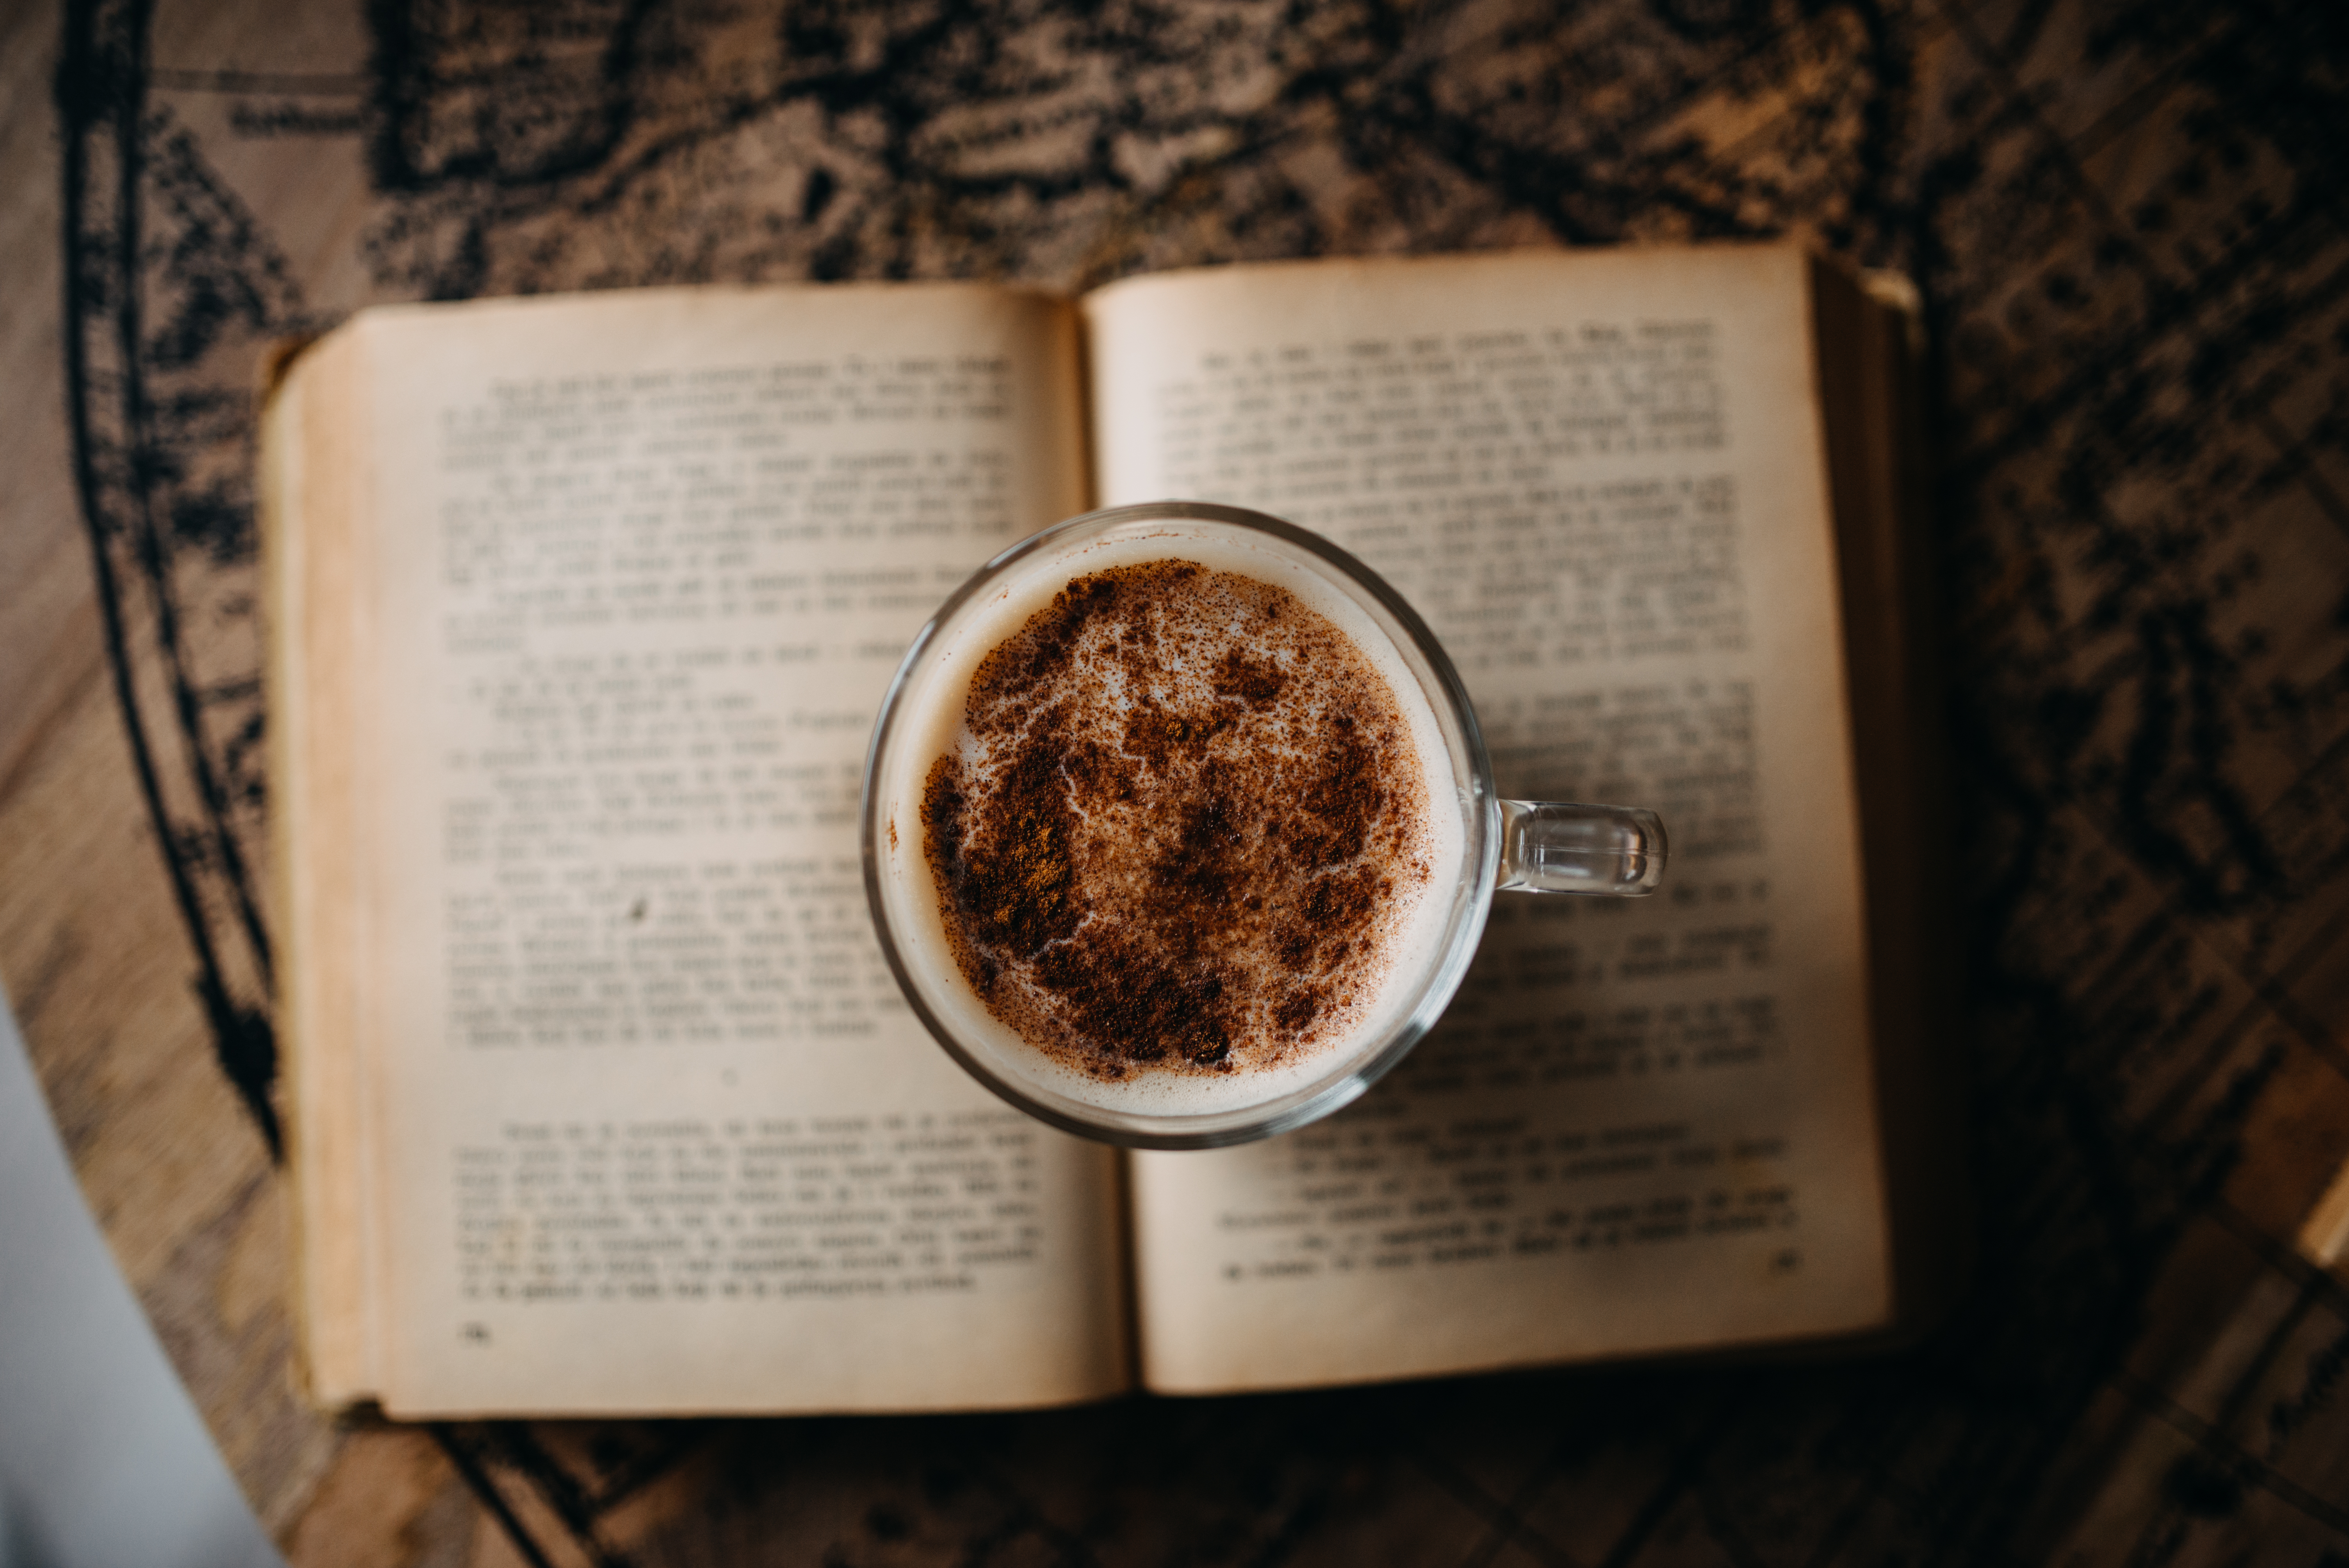 mug, drink, food, book collection of HD images